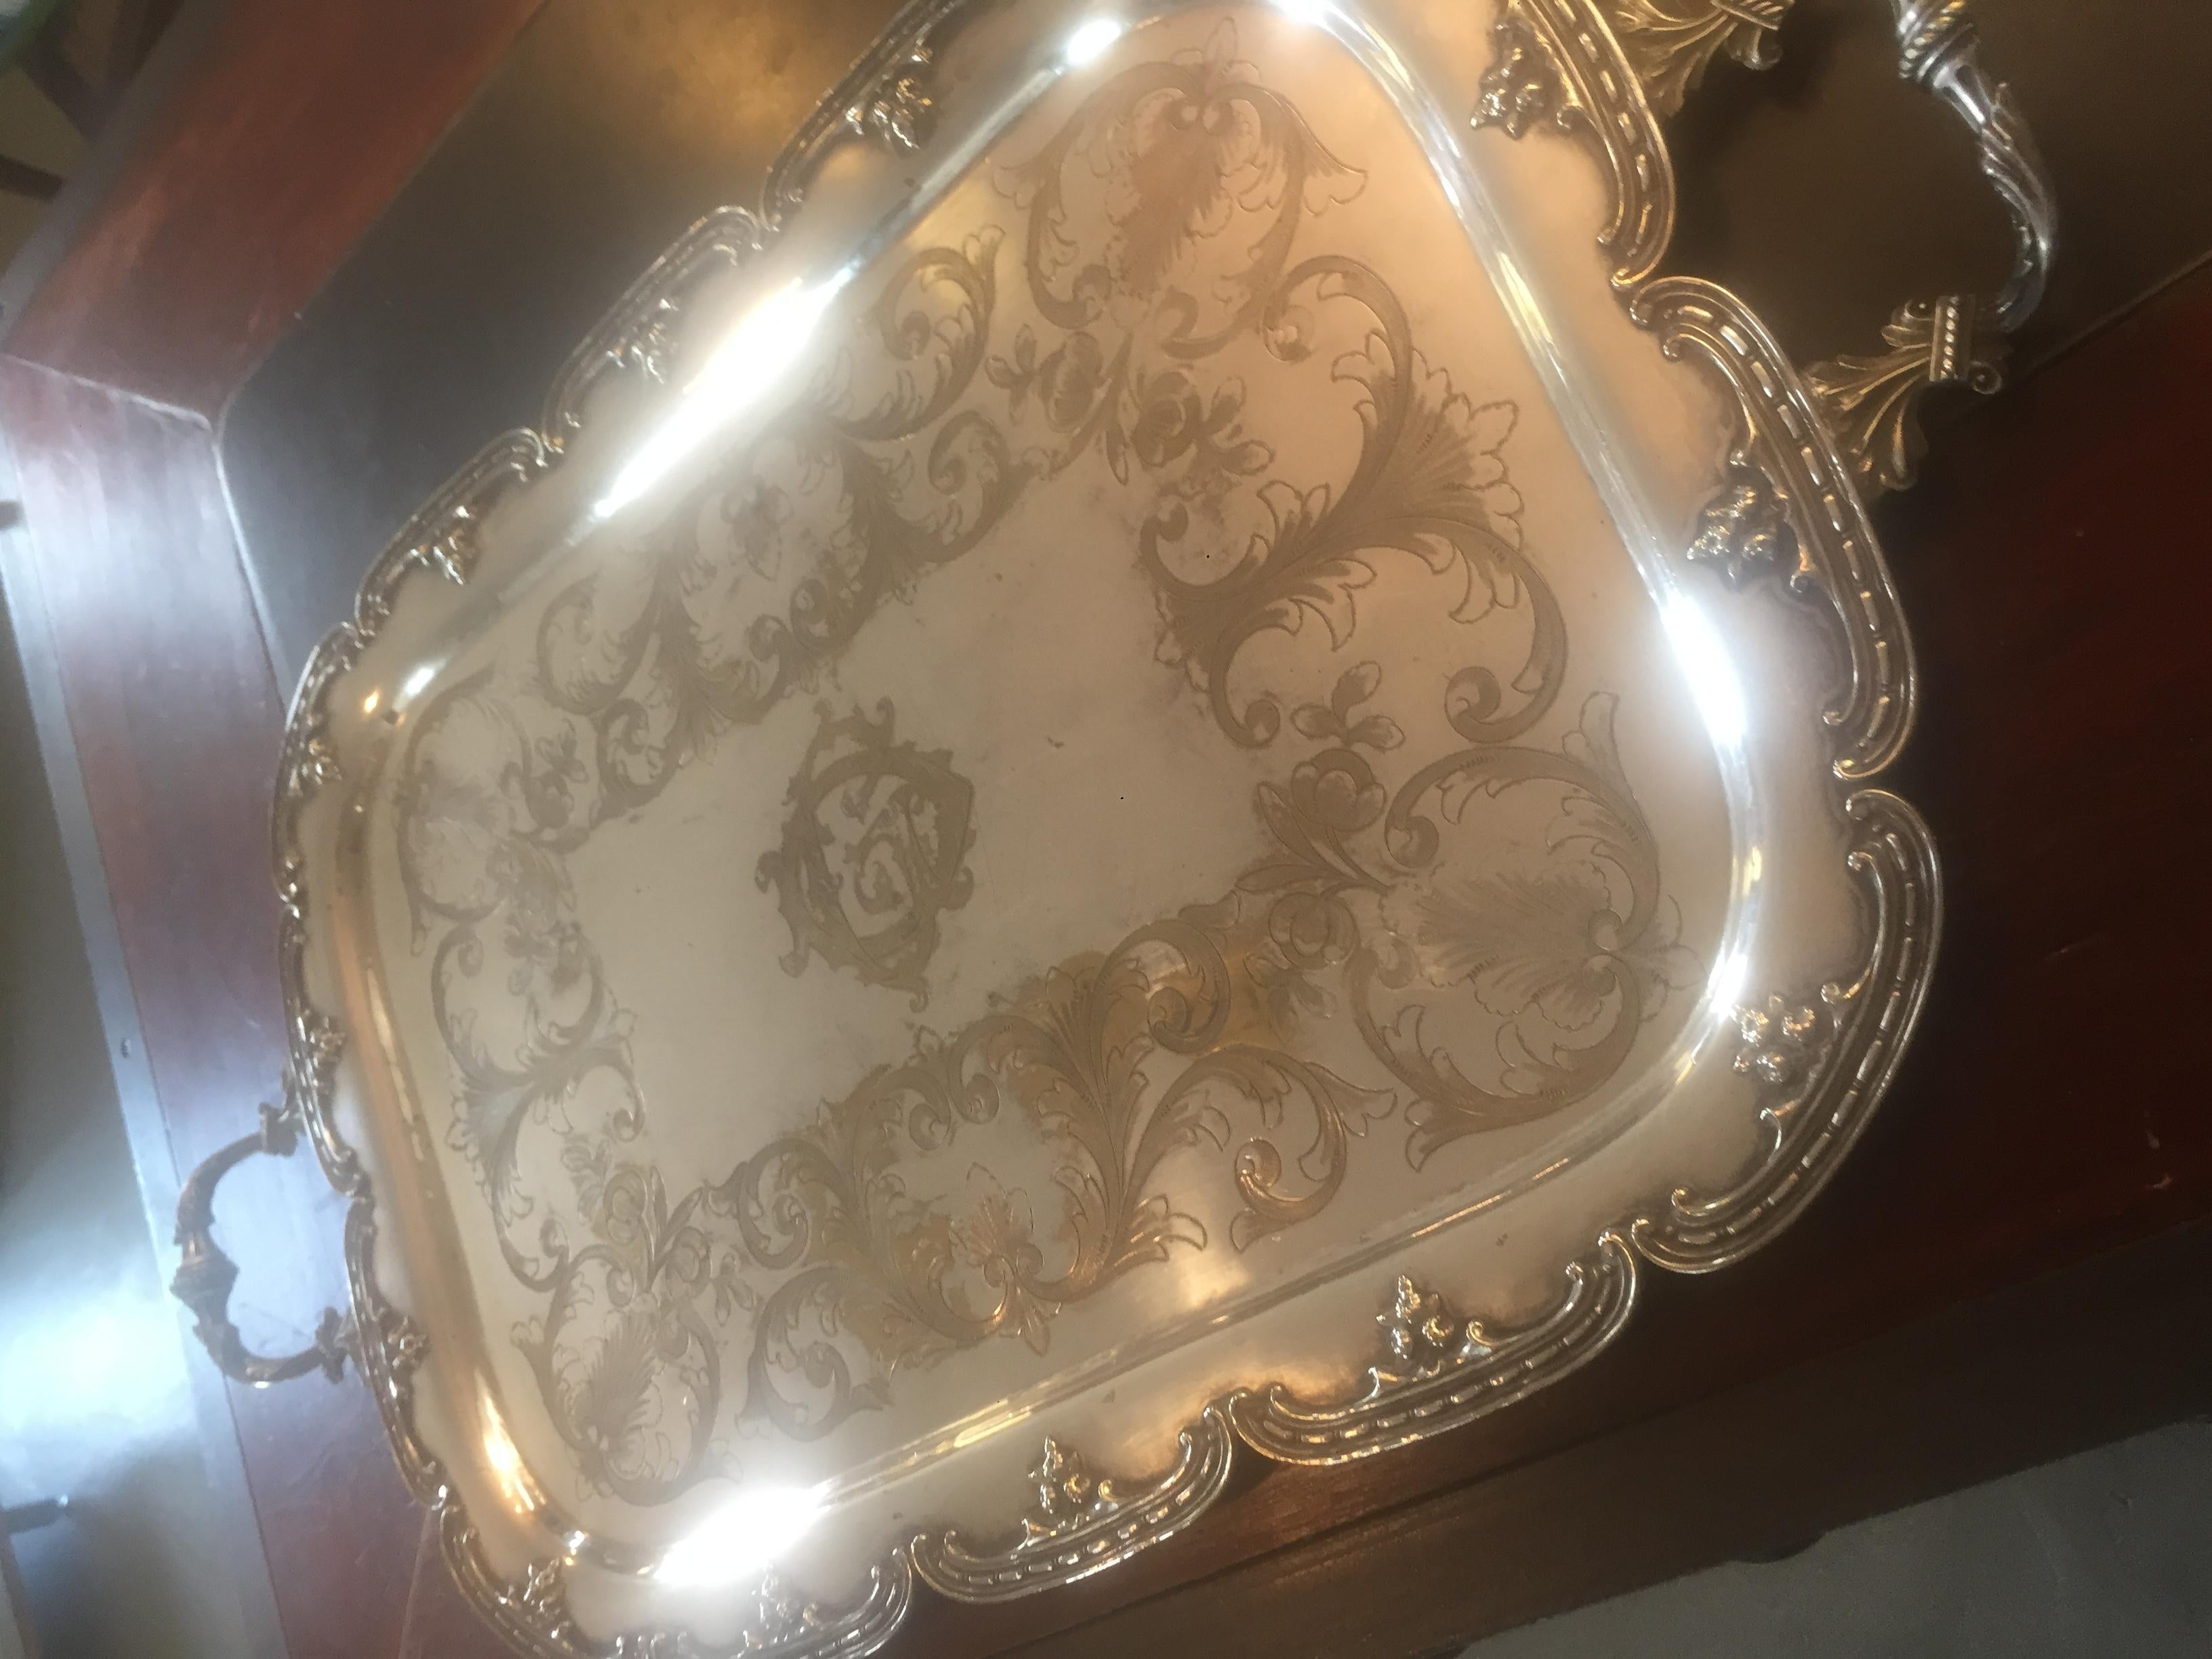 20th century French Louis XV style silver plated monogramed Tray from the 1900s. 
Monogram 